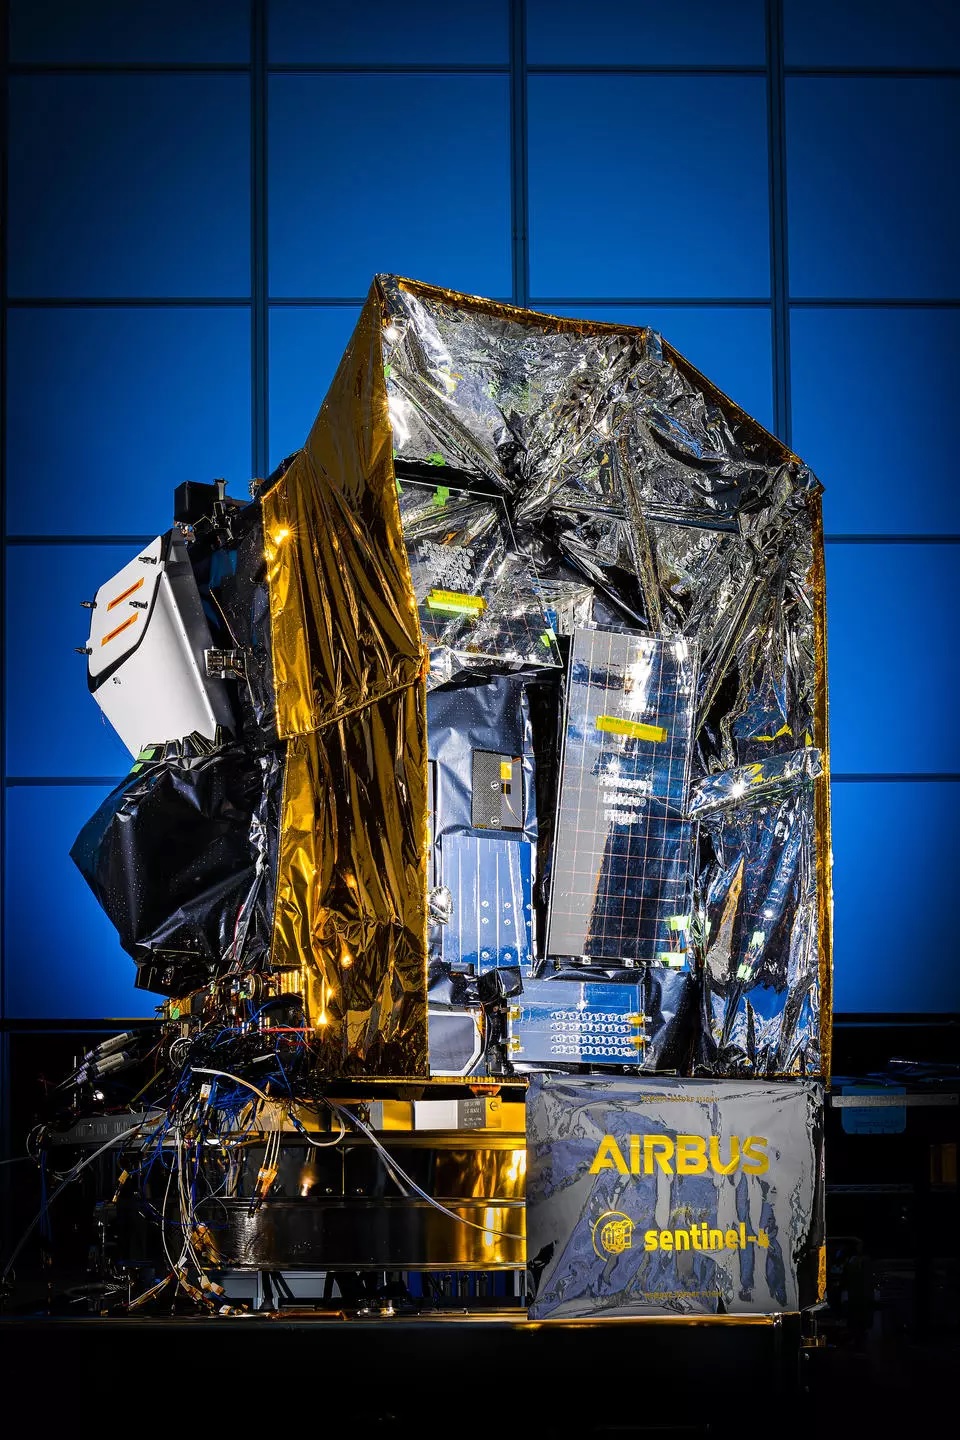 Airbus Defence and Space has delivered the first Sentinel-4/UVN (Ultraviolet, Visible and Near Infra-Red) multispectral instrument flight model to the European Space Agency (ESA). It will be integrated onto the Meteosat Third Generation Sounder (MTG-S1) satellite next year.